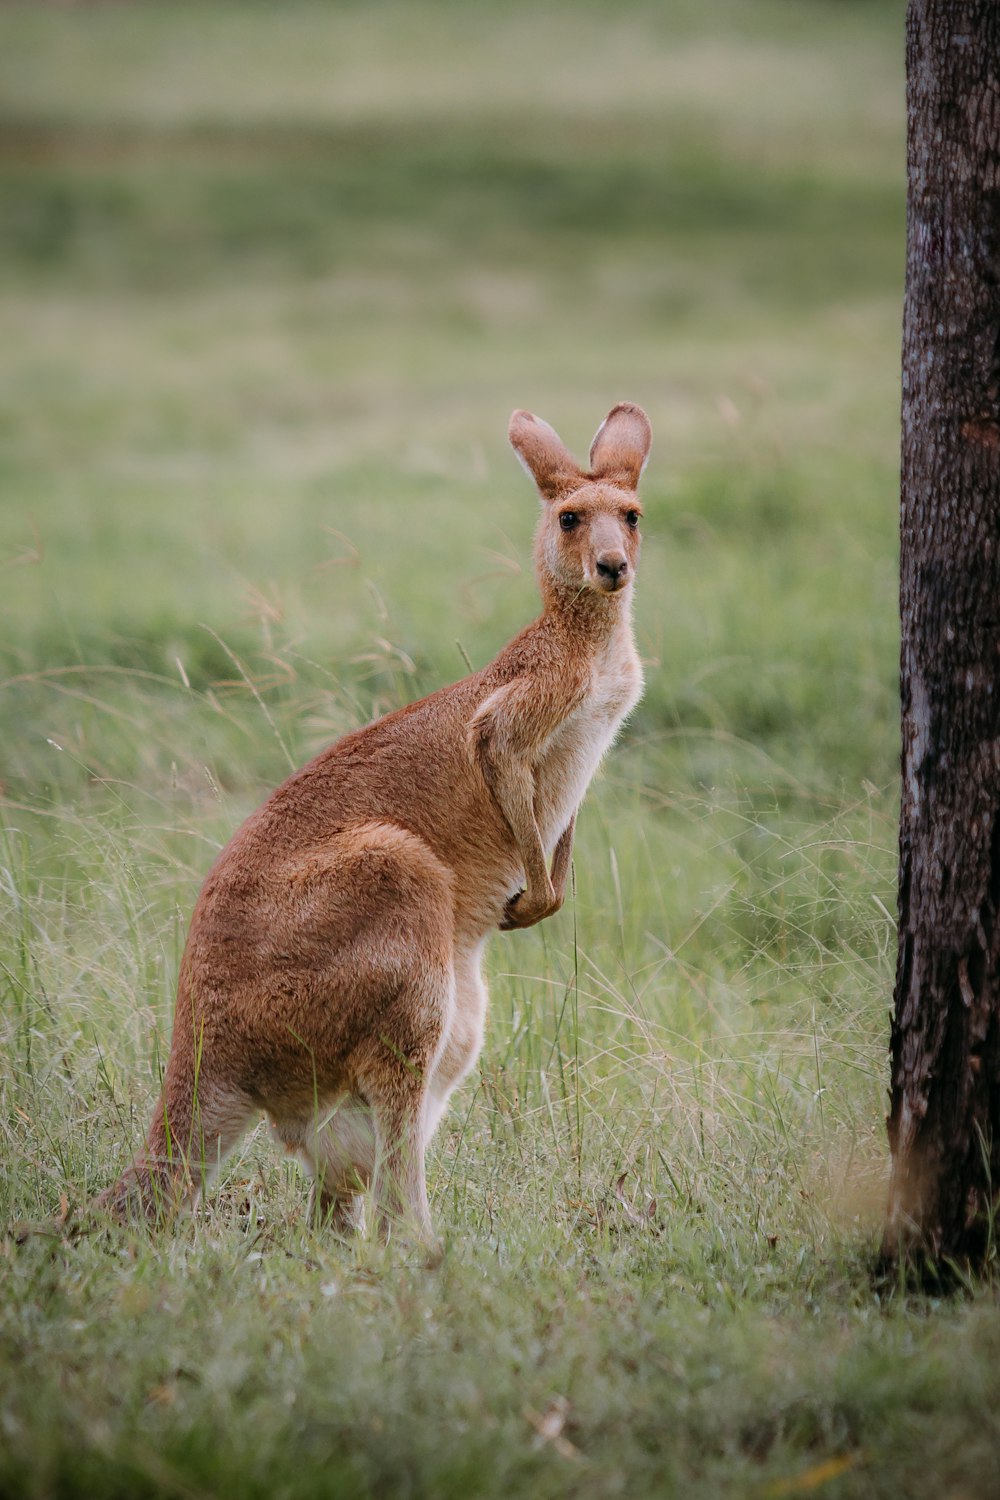 a kangaroo standing next to a tree in a field